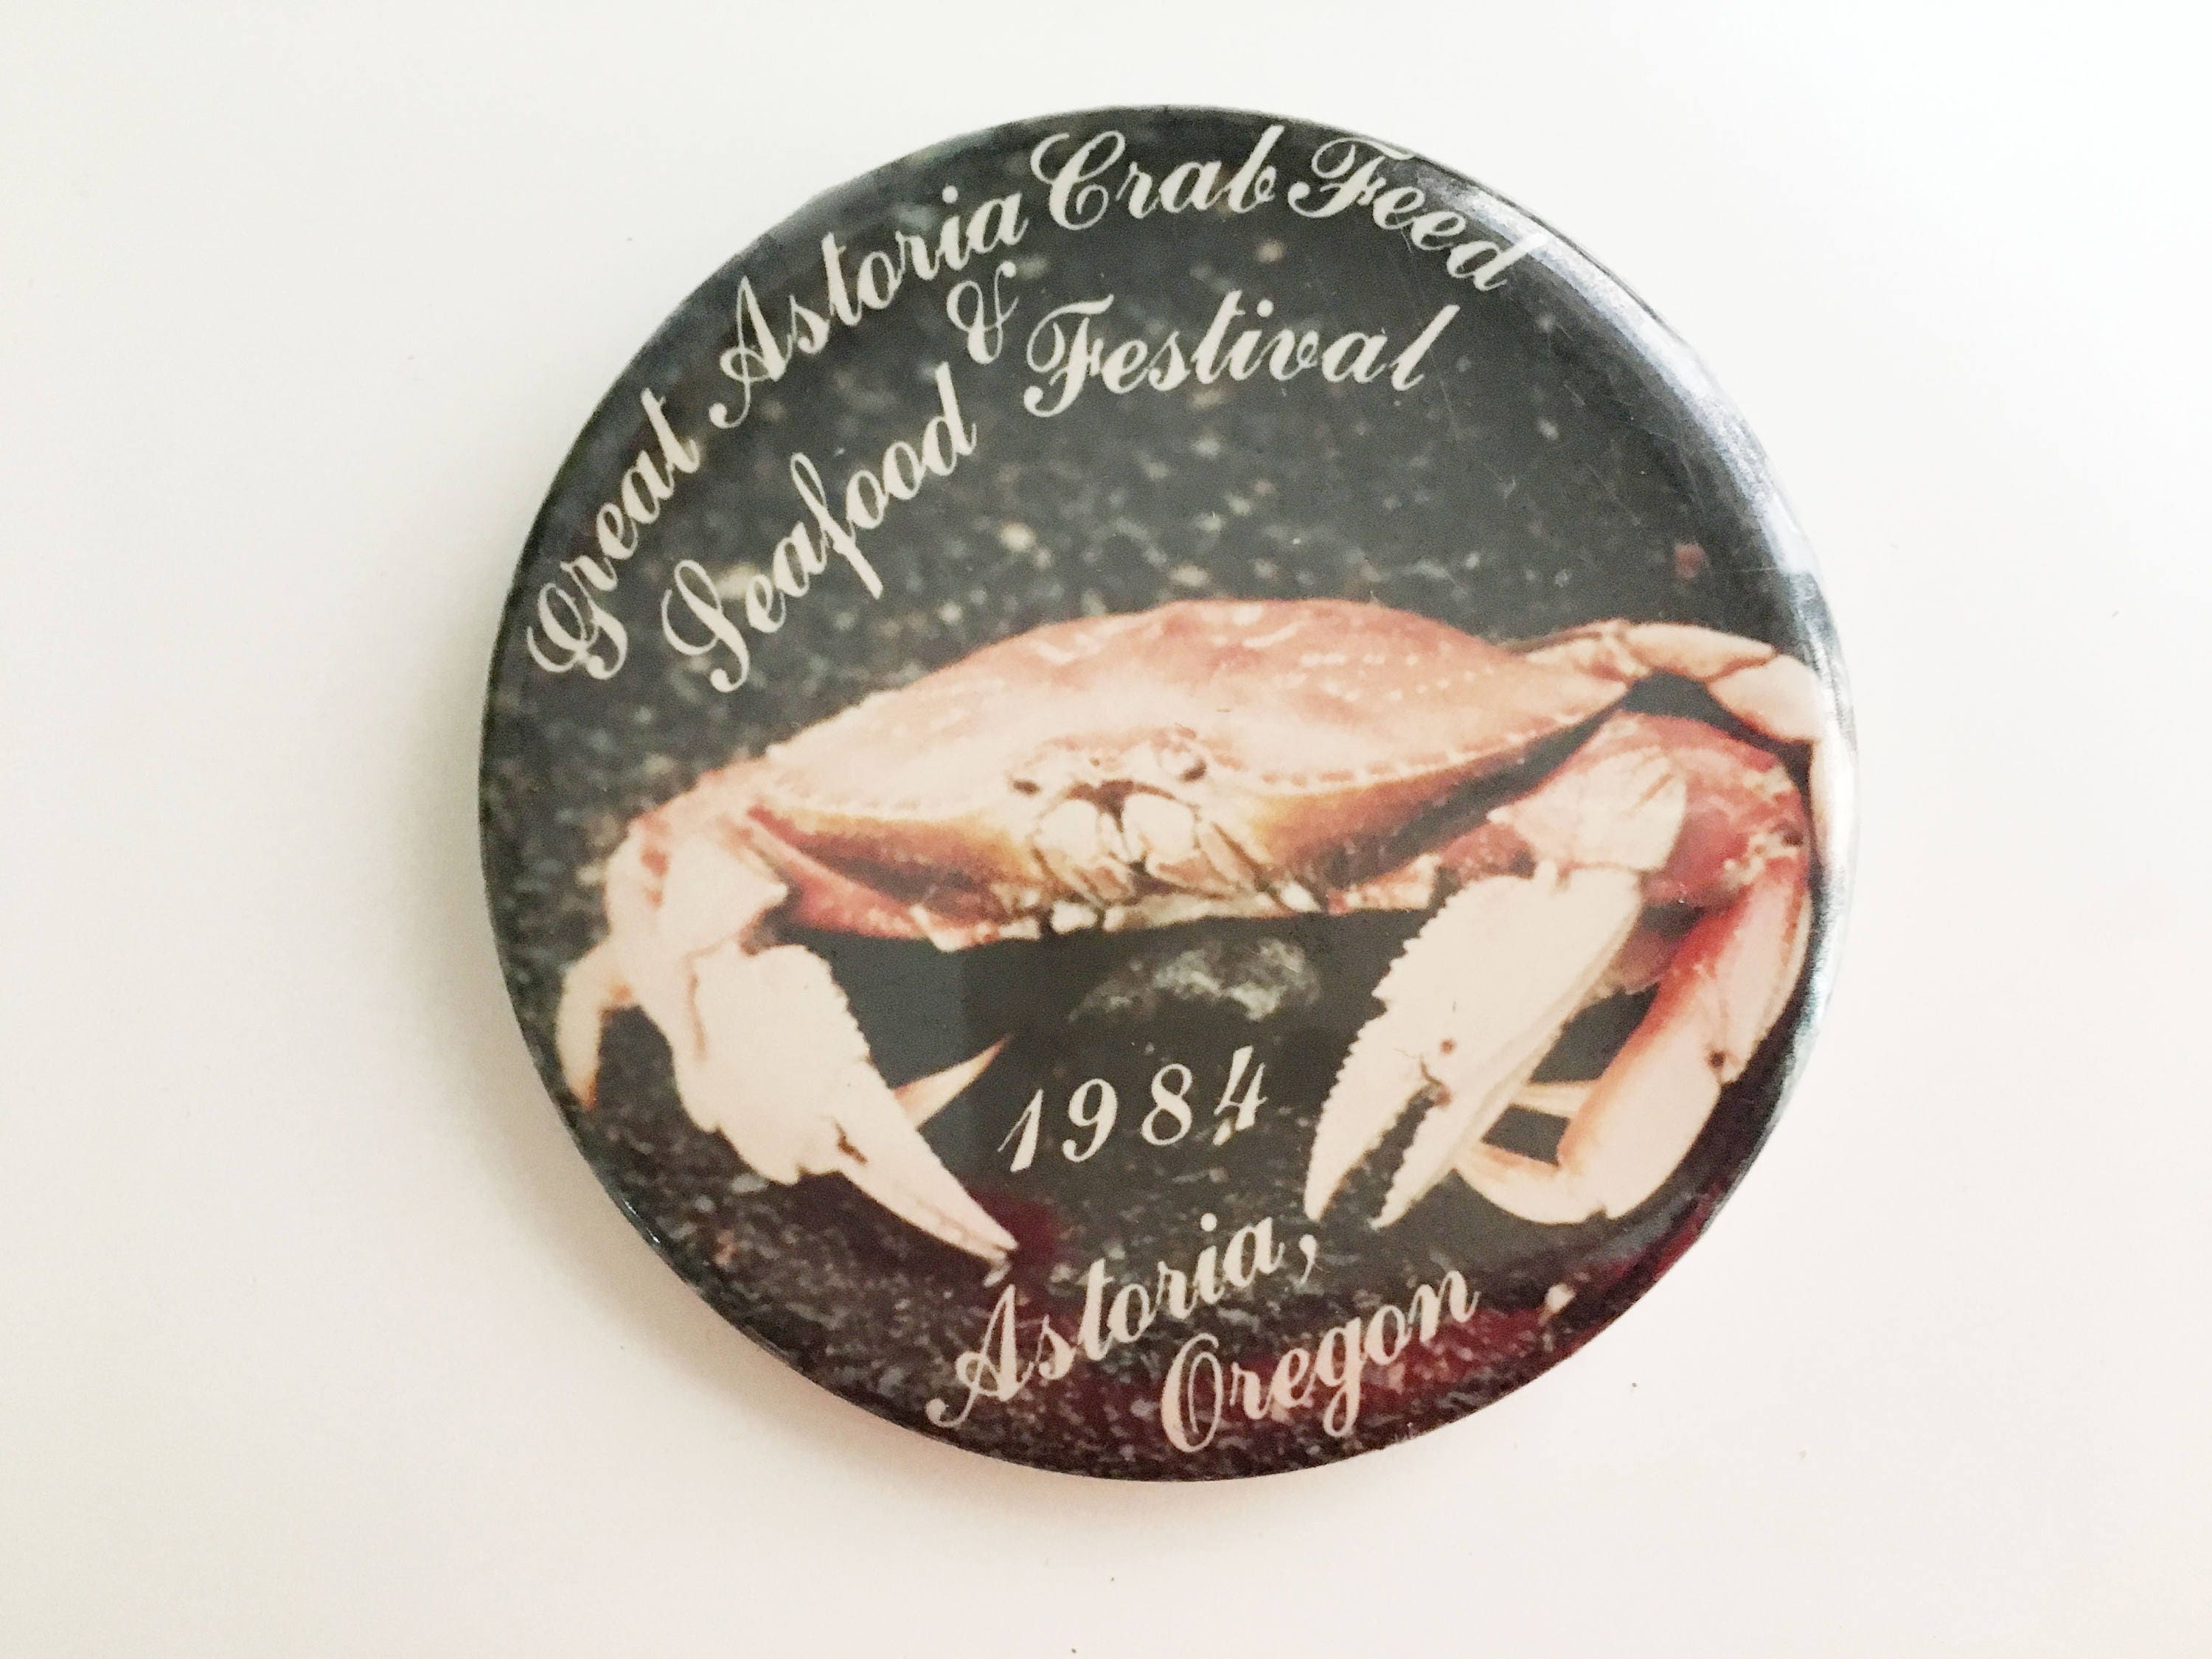 Great Astoria Crab Feed Seafood Festival Oregon Large Pinback Button 1984